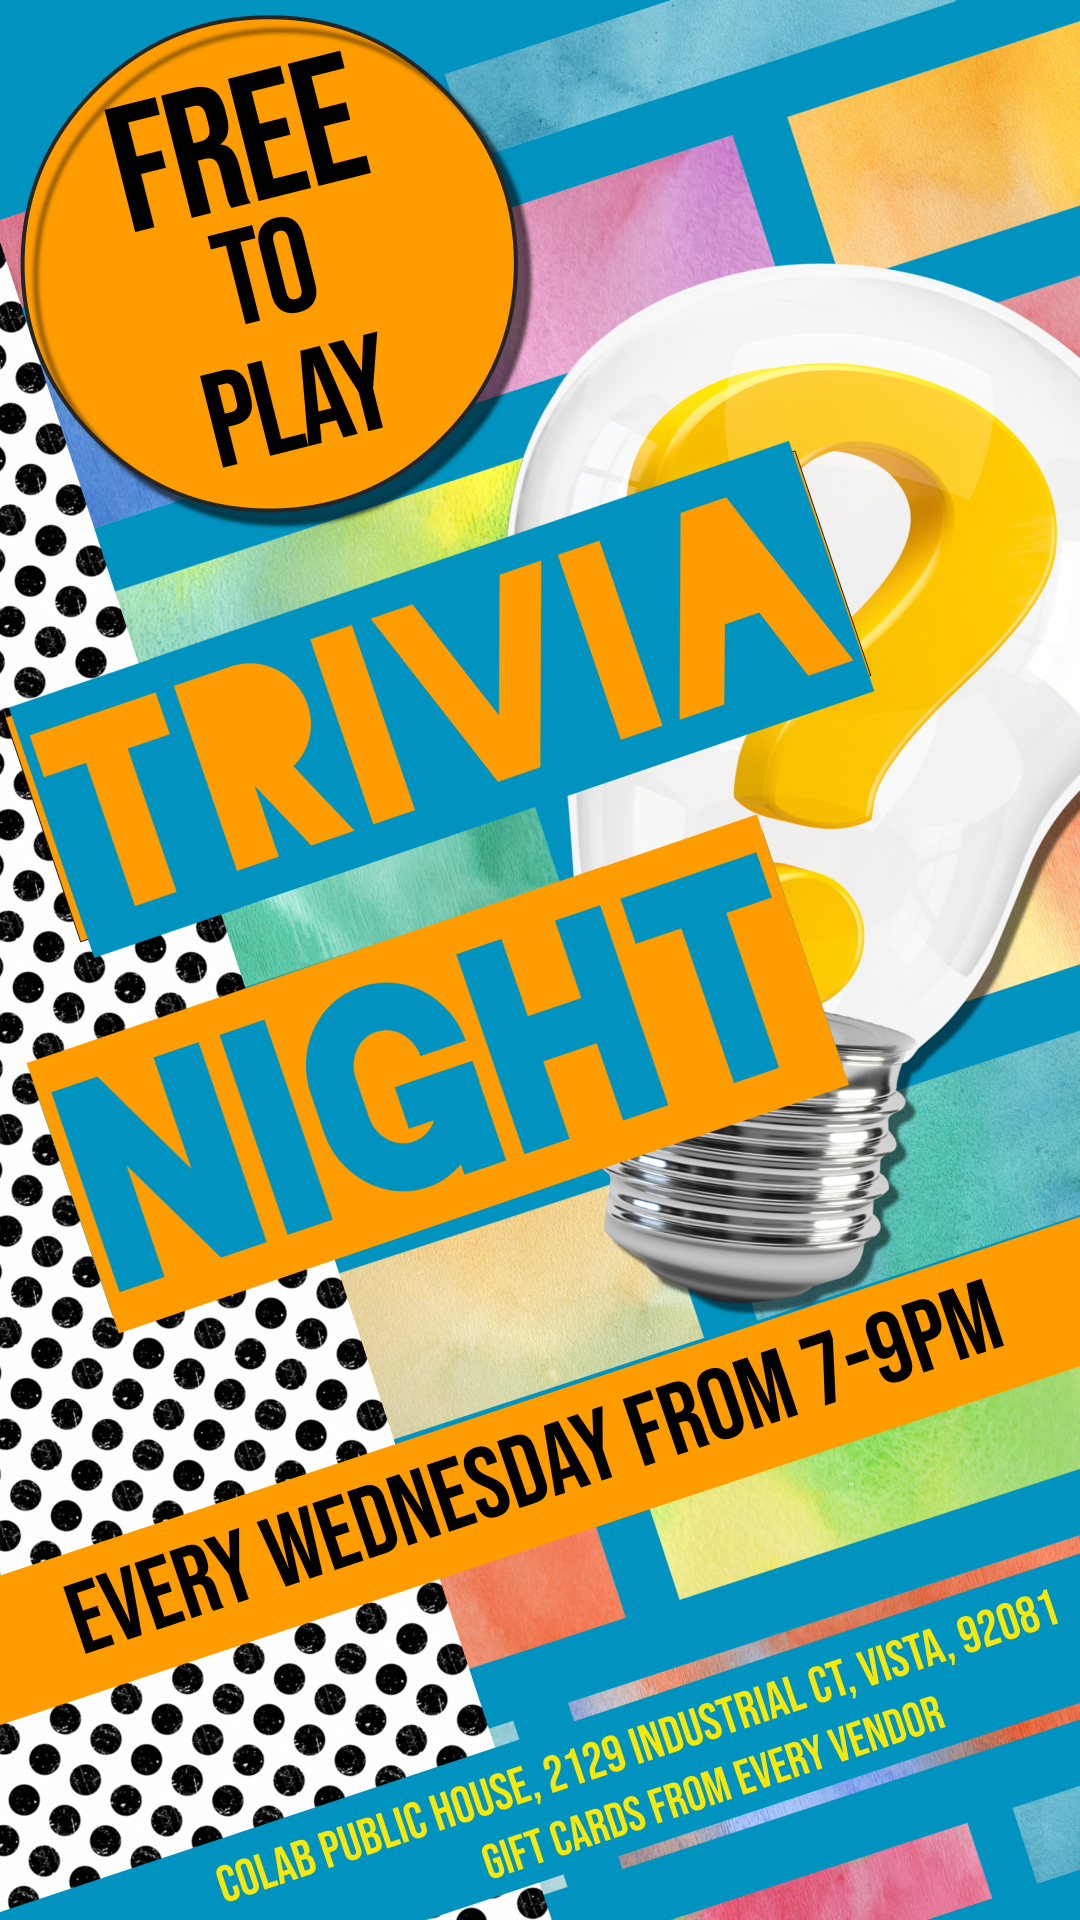 Free to Play, Trivia Night, Every Wednesday from 7 to 9 PM